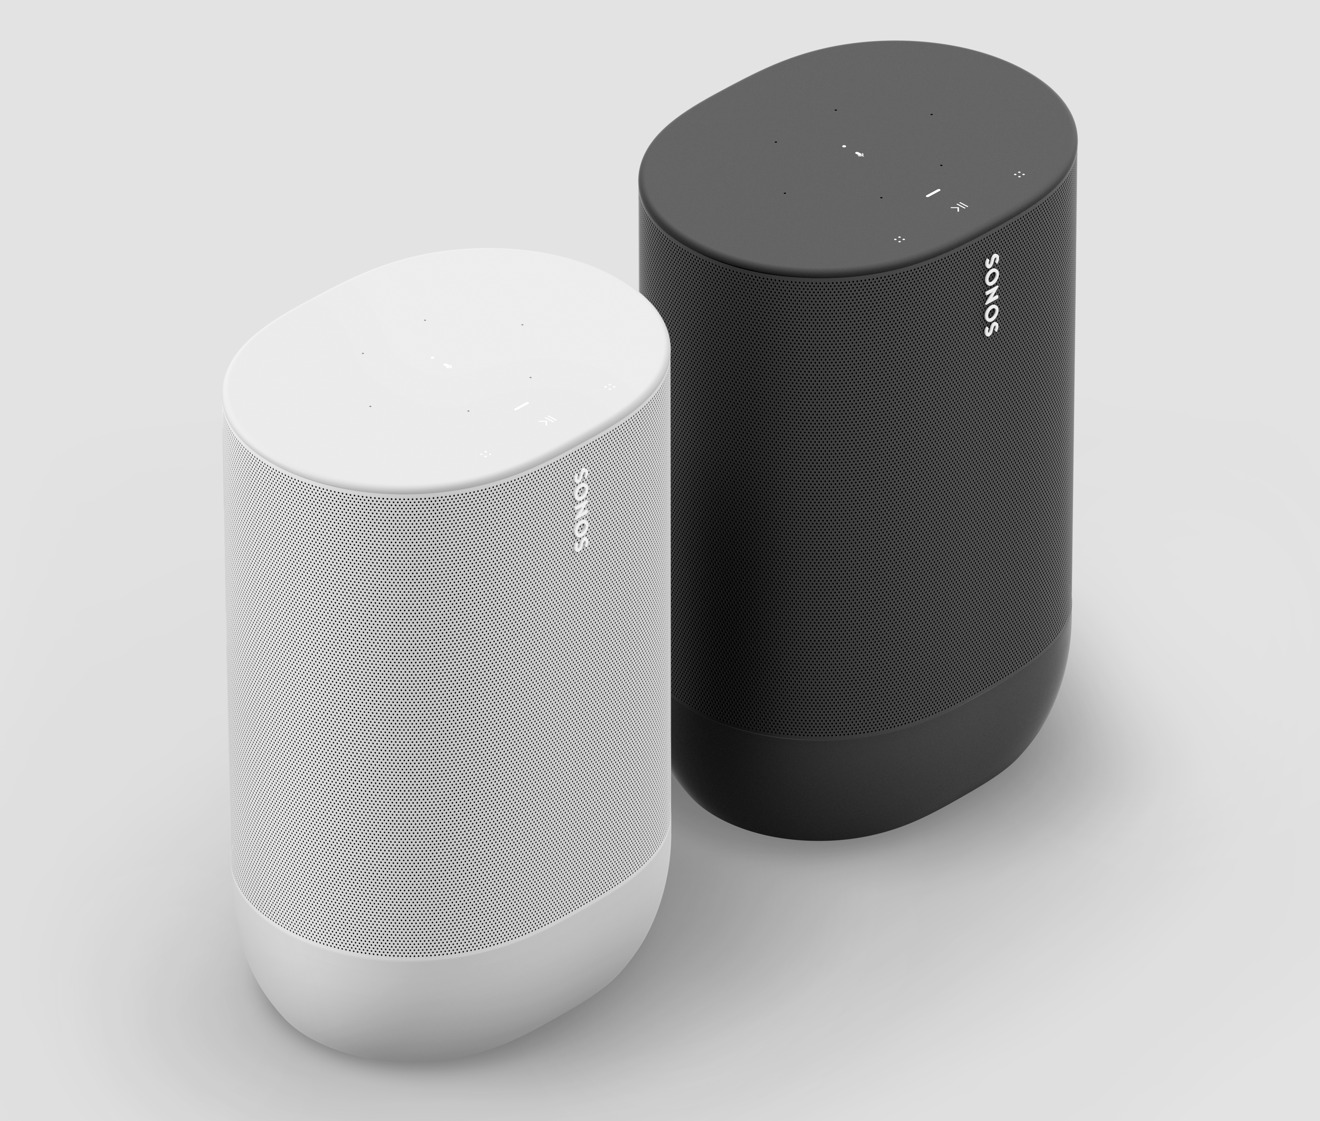 Sonos-Move-software-update-grants-hour-of-battery-life-now